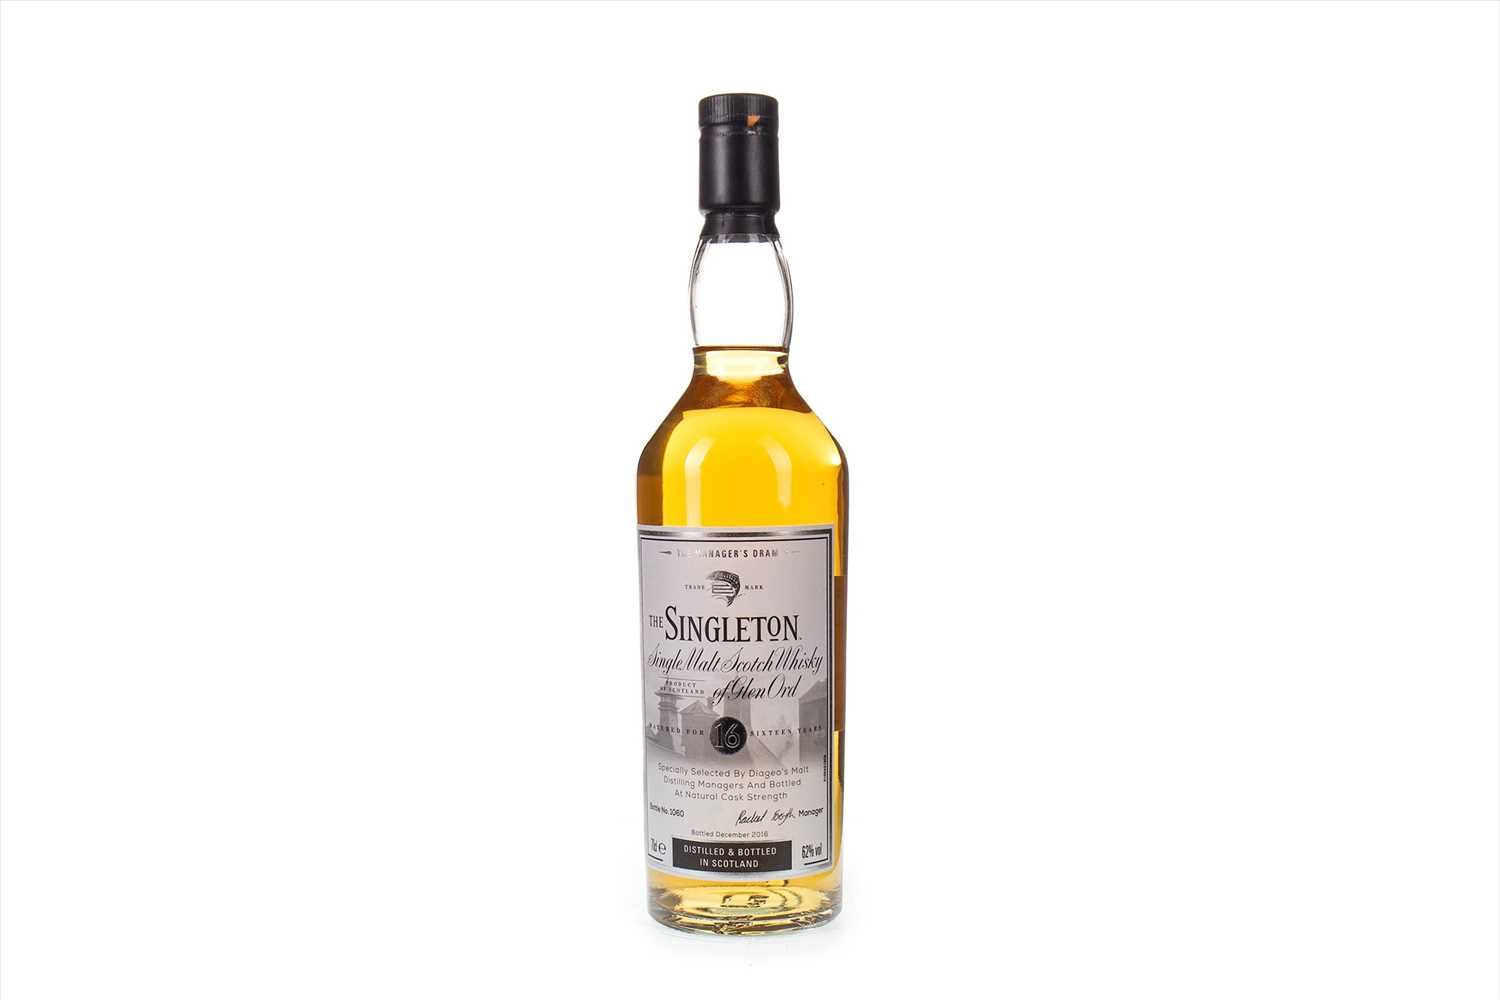 Lot 97 - SINGLETON OF GLEN ORD MANAGERS DRAM AGED 16 YEARS